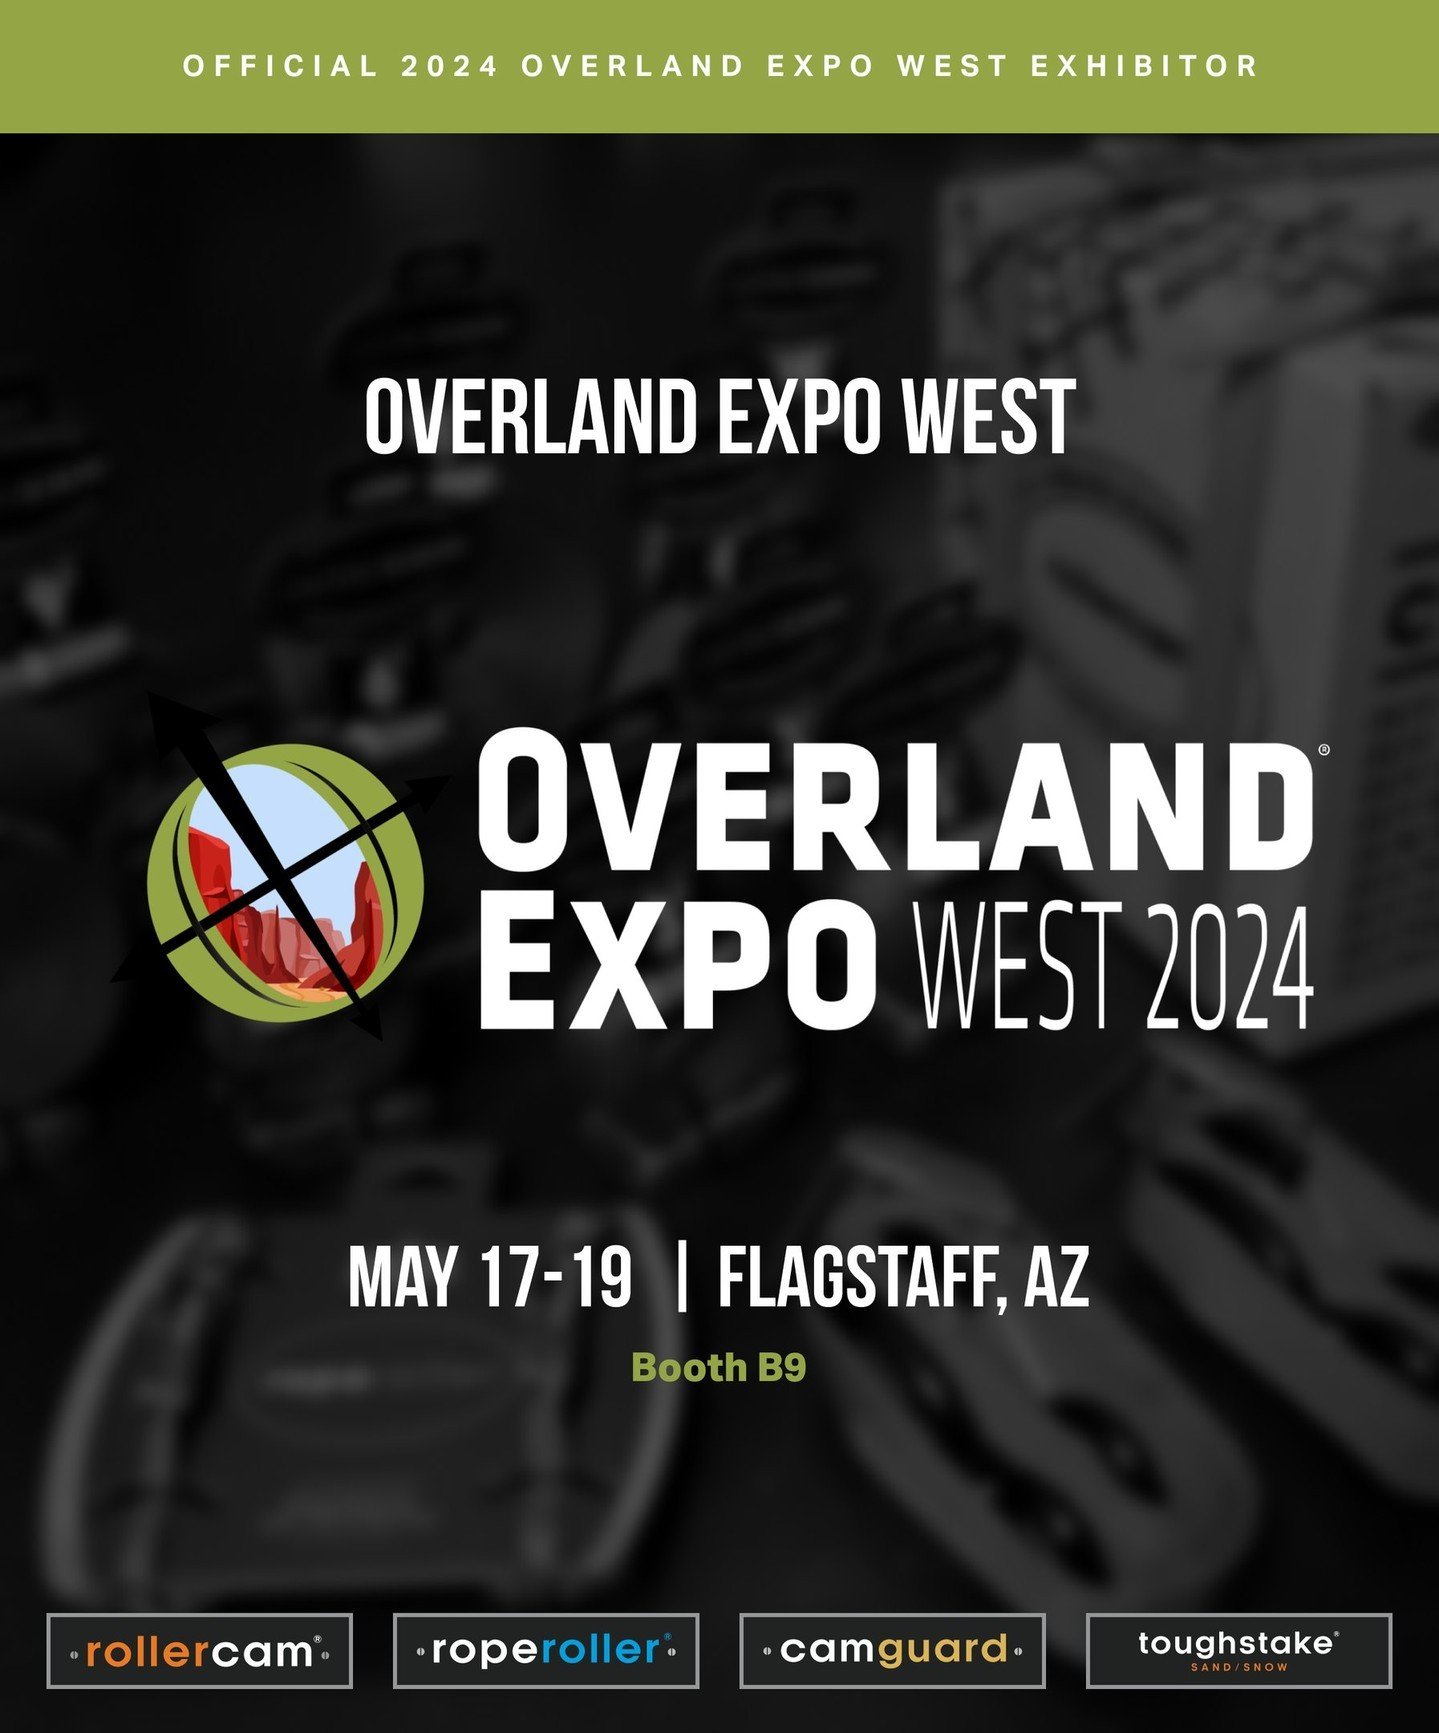 We're officially two weeks out from @overlandexpo West, and we can't wait to see you all and share our new product lineup! ⁠
⁠
We'll be in Booth B9 right off the main walkway west of the walk-in entrance, so swing by, say hi, and pick up some straps.